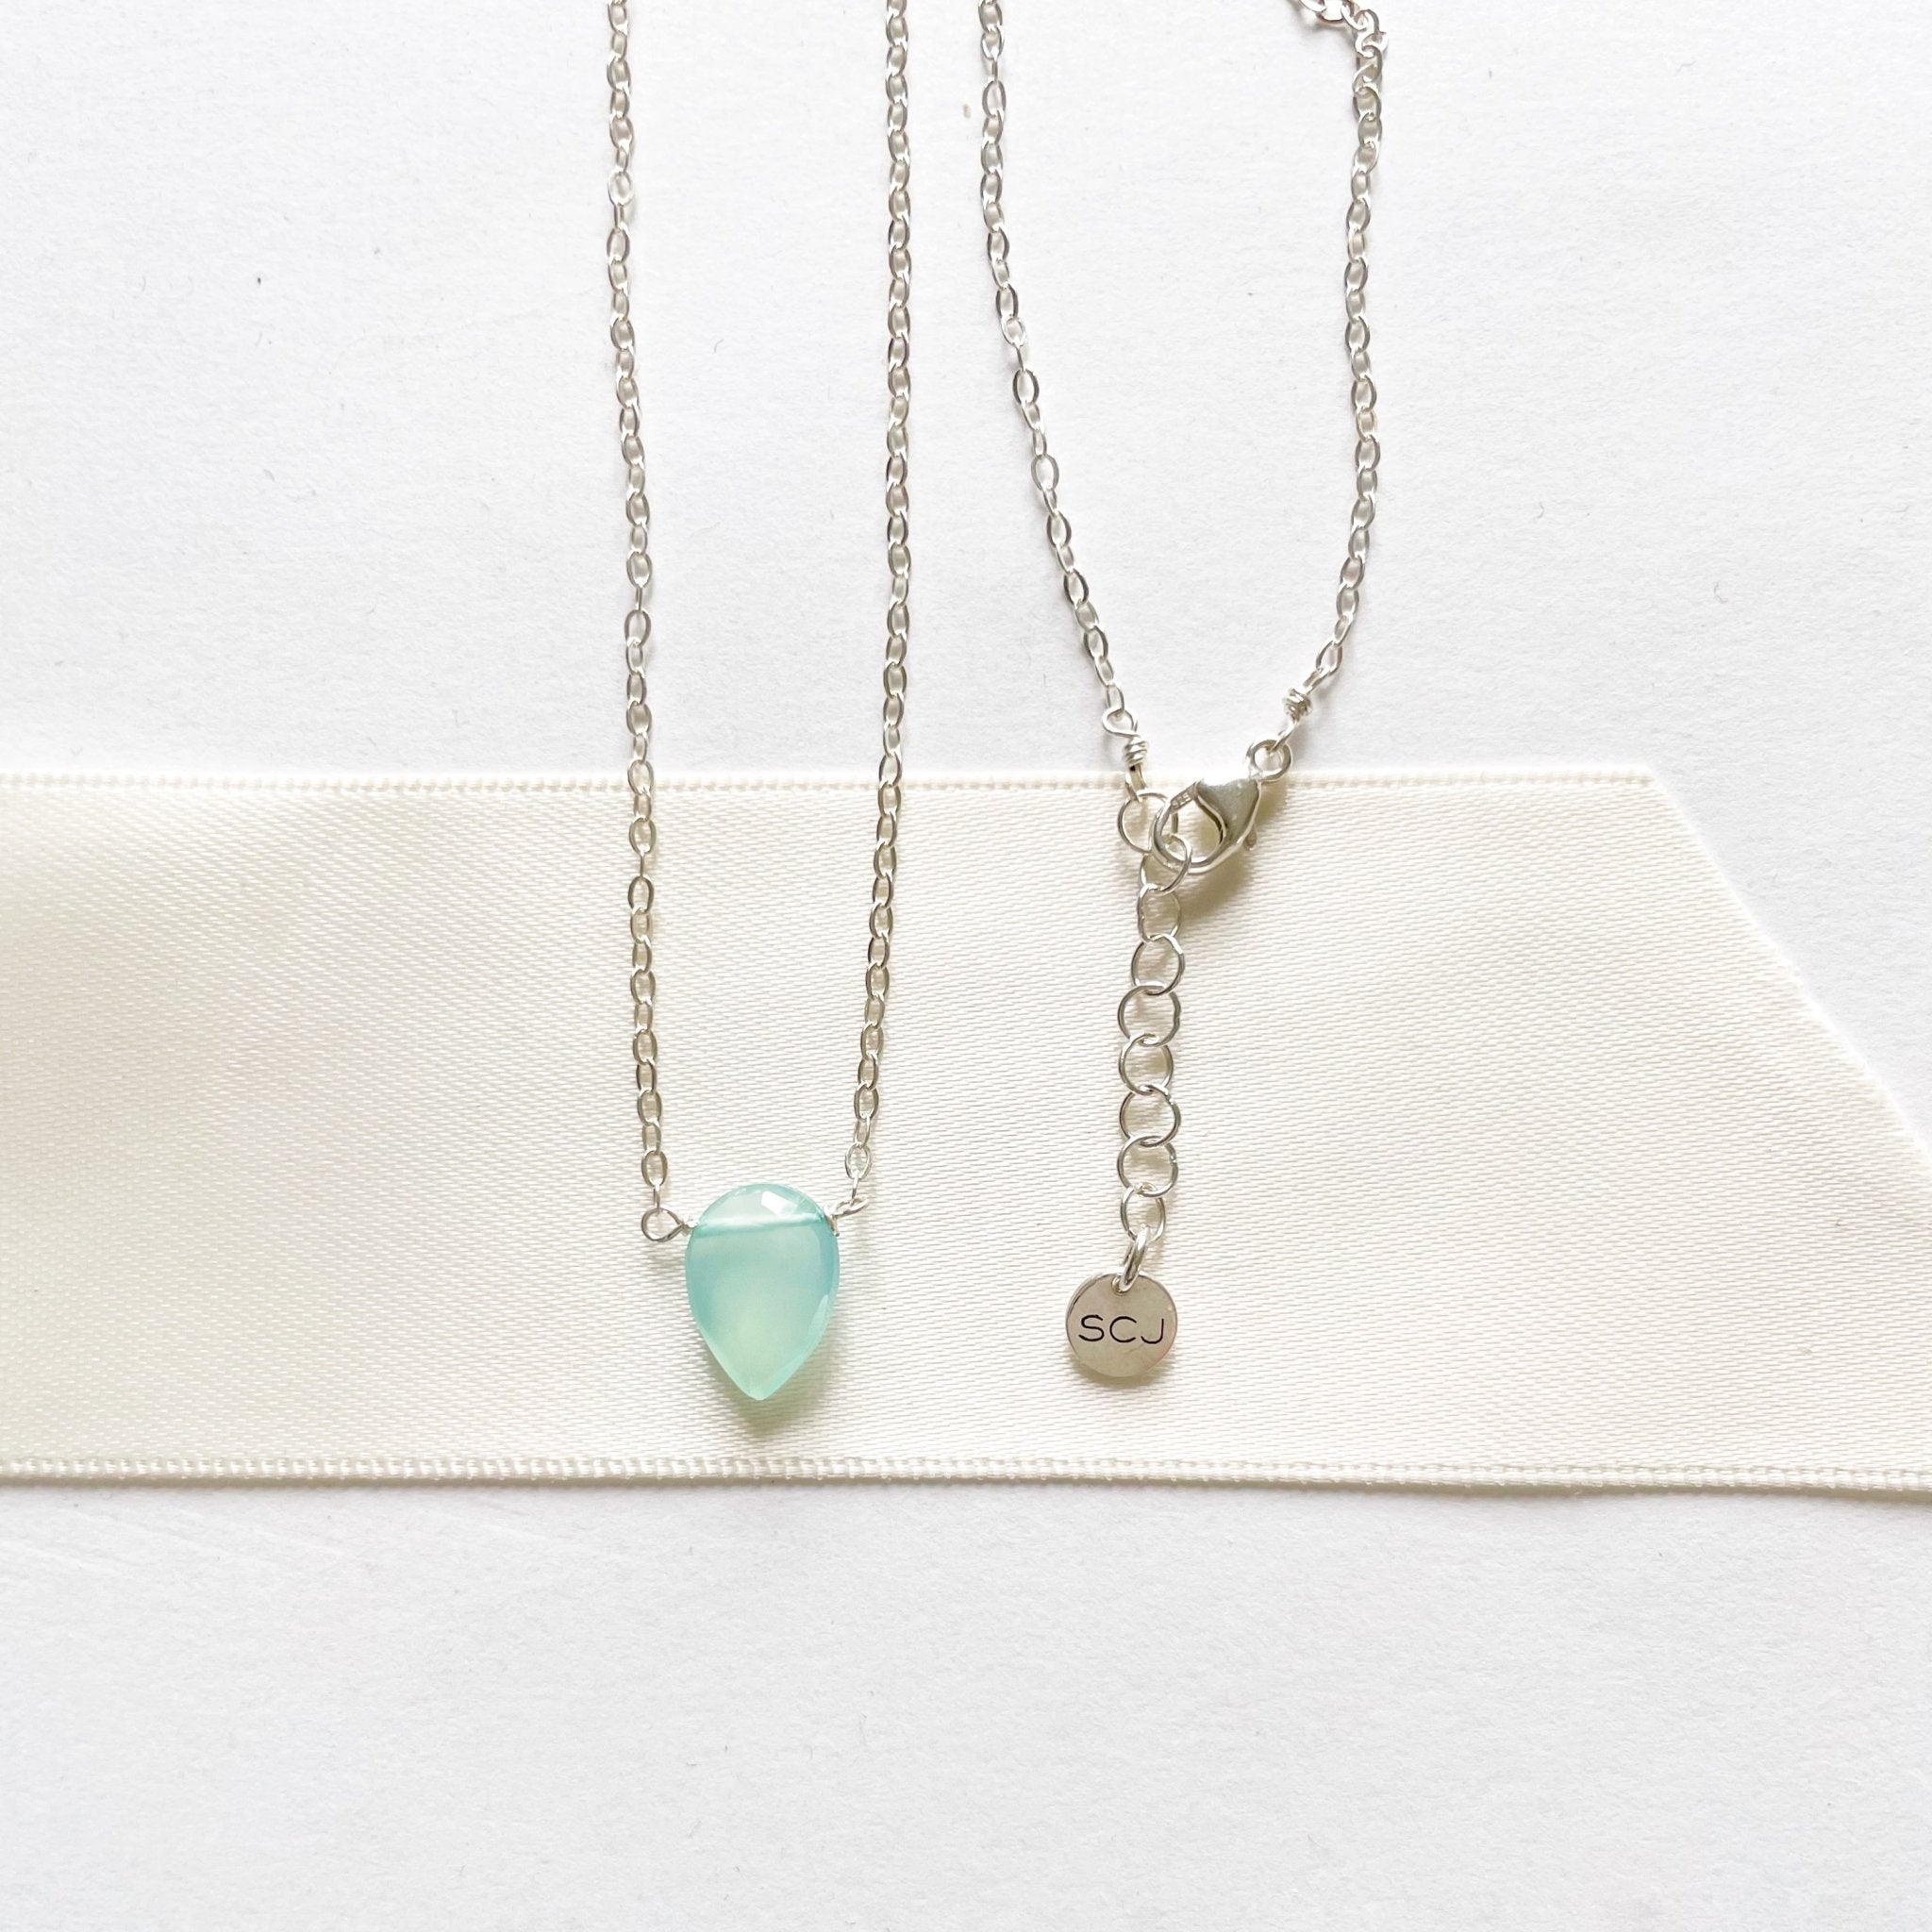 17 inch silver pendant necklace with teardrop shaped aqua chalcedony pendant. Hampton Necklace by Sarah Cornwell Jewelry